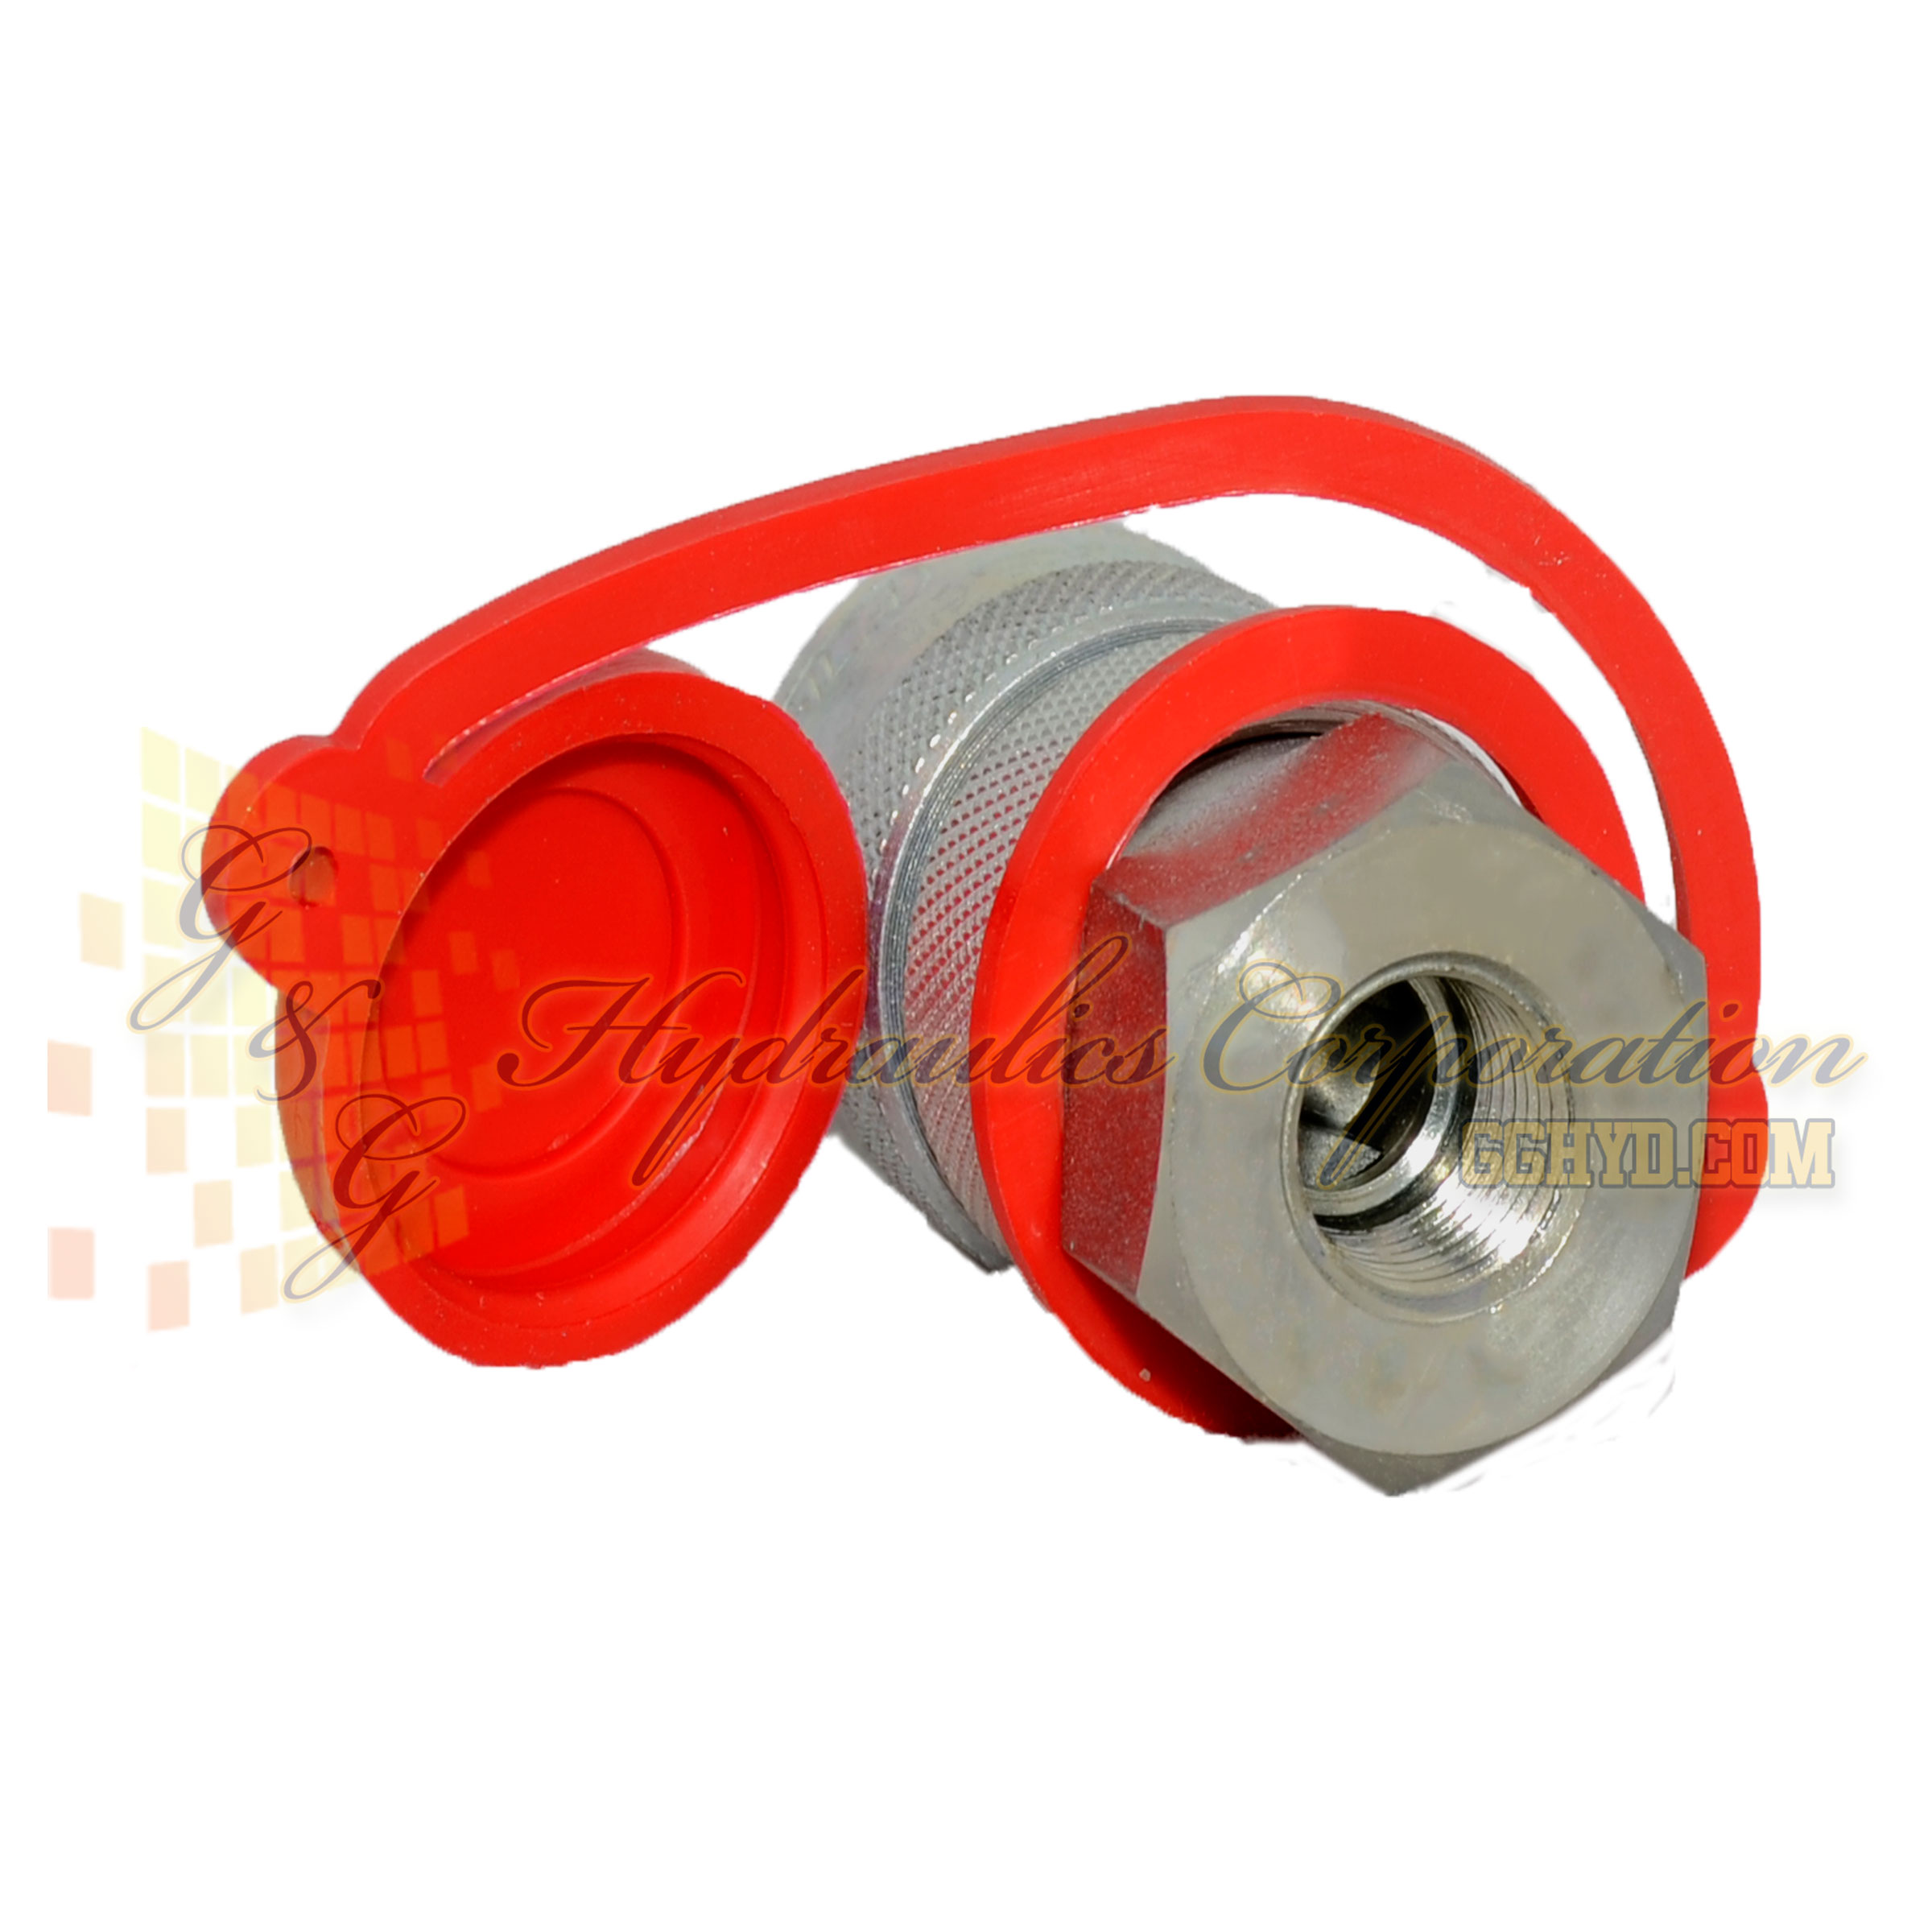 10-115-1222 CEJN Quick Disconnect Coupler, 1/4" BSPP Female Threads w/ Locking Ring, 14,500 PSI (1000 bar)